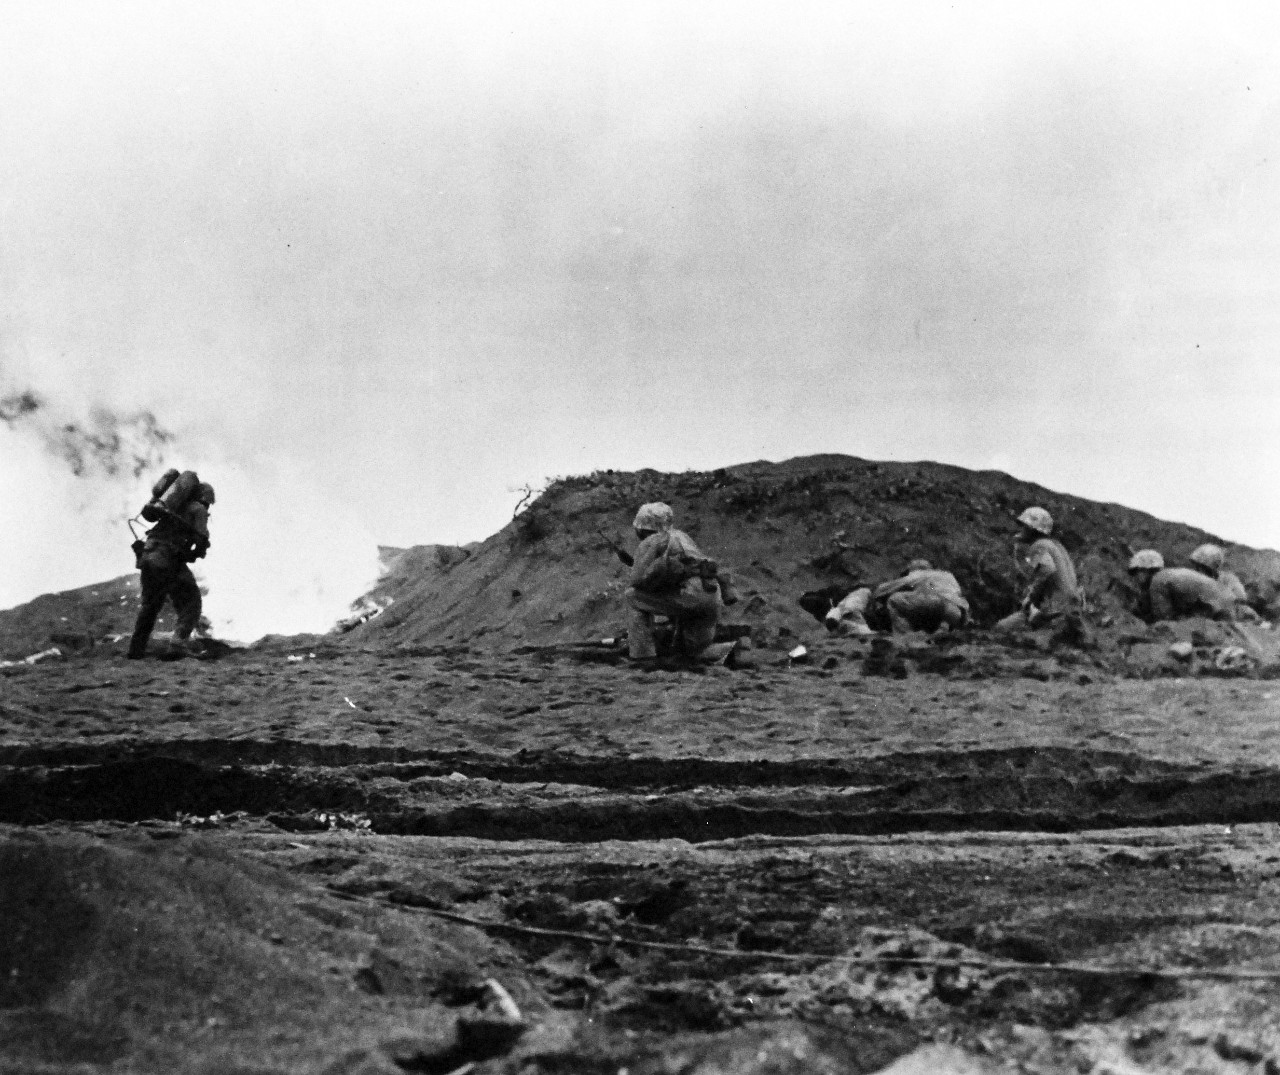 80-G-304845:  Battle for Iwo Jima, February 19, 1945.   A wave of Fourth Division Marines beginning an attack from the beach at Iwo Jima.   A die-hard Japanese soldier gets a blast of liquid flame.  Fifth Marine Division rifleman surround the dug-out ready to pour covering fire into the opening.  The flame thrower, supported by covering rifle fire, has been a basic weapon in the cave to cave-battle on the volcanic rock.  Photograph released February 19, 1945.  U.S. Navy Photograph now in the collections of the National Archives.  (2016/01/19).